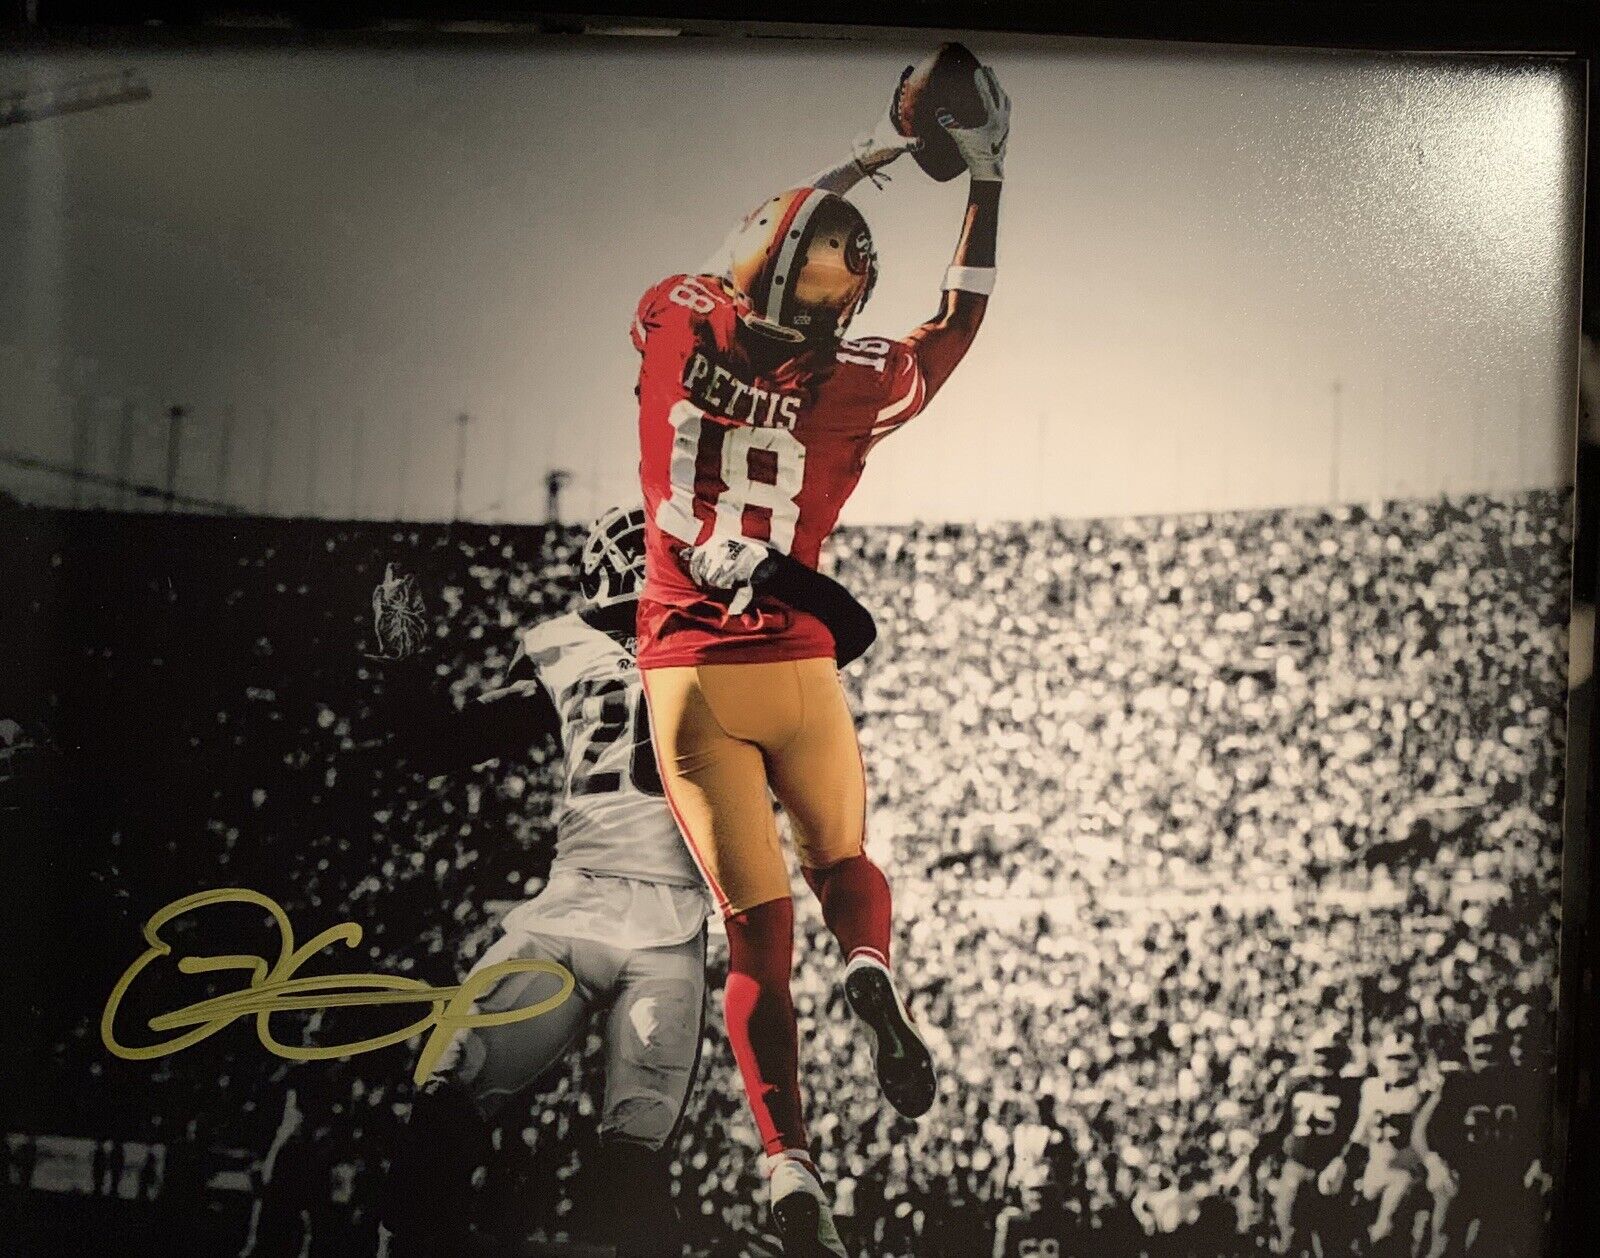 dante pettis Signed Auto 8x10 Photo Poster painting Niners 49ers Pic